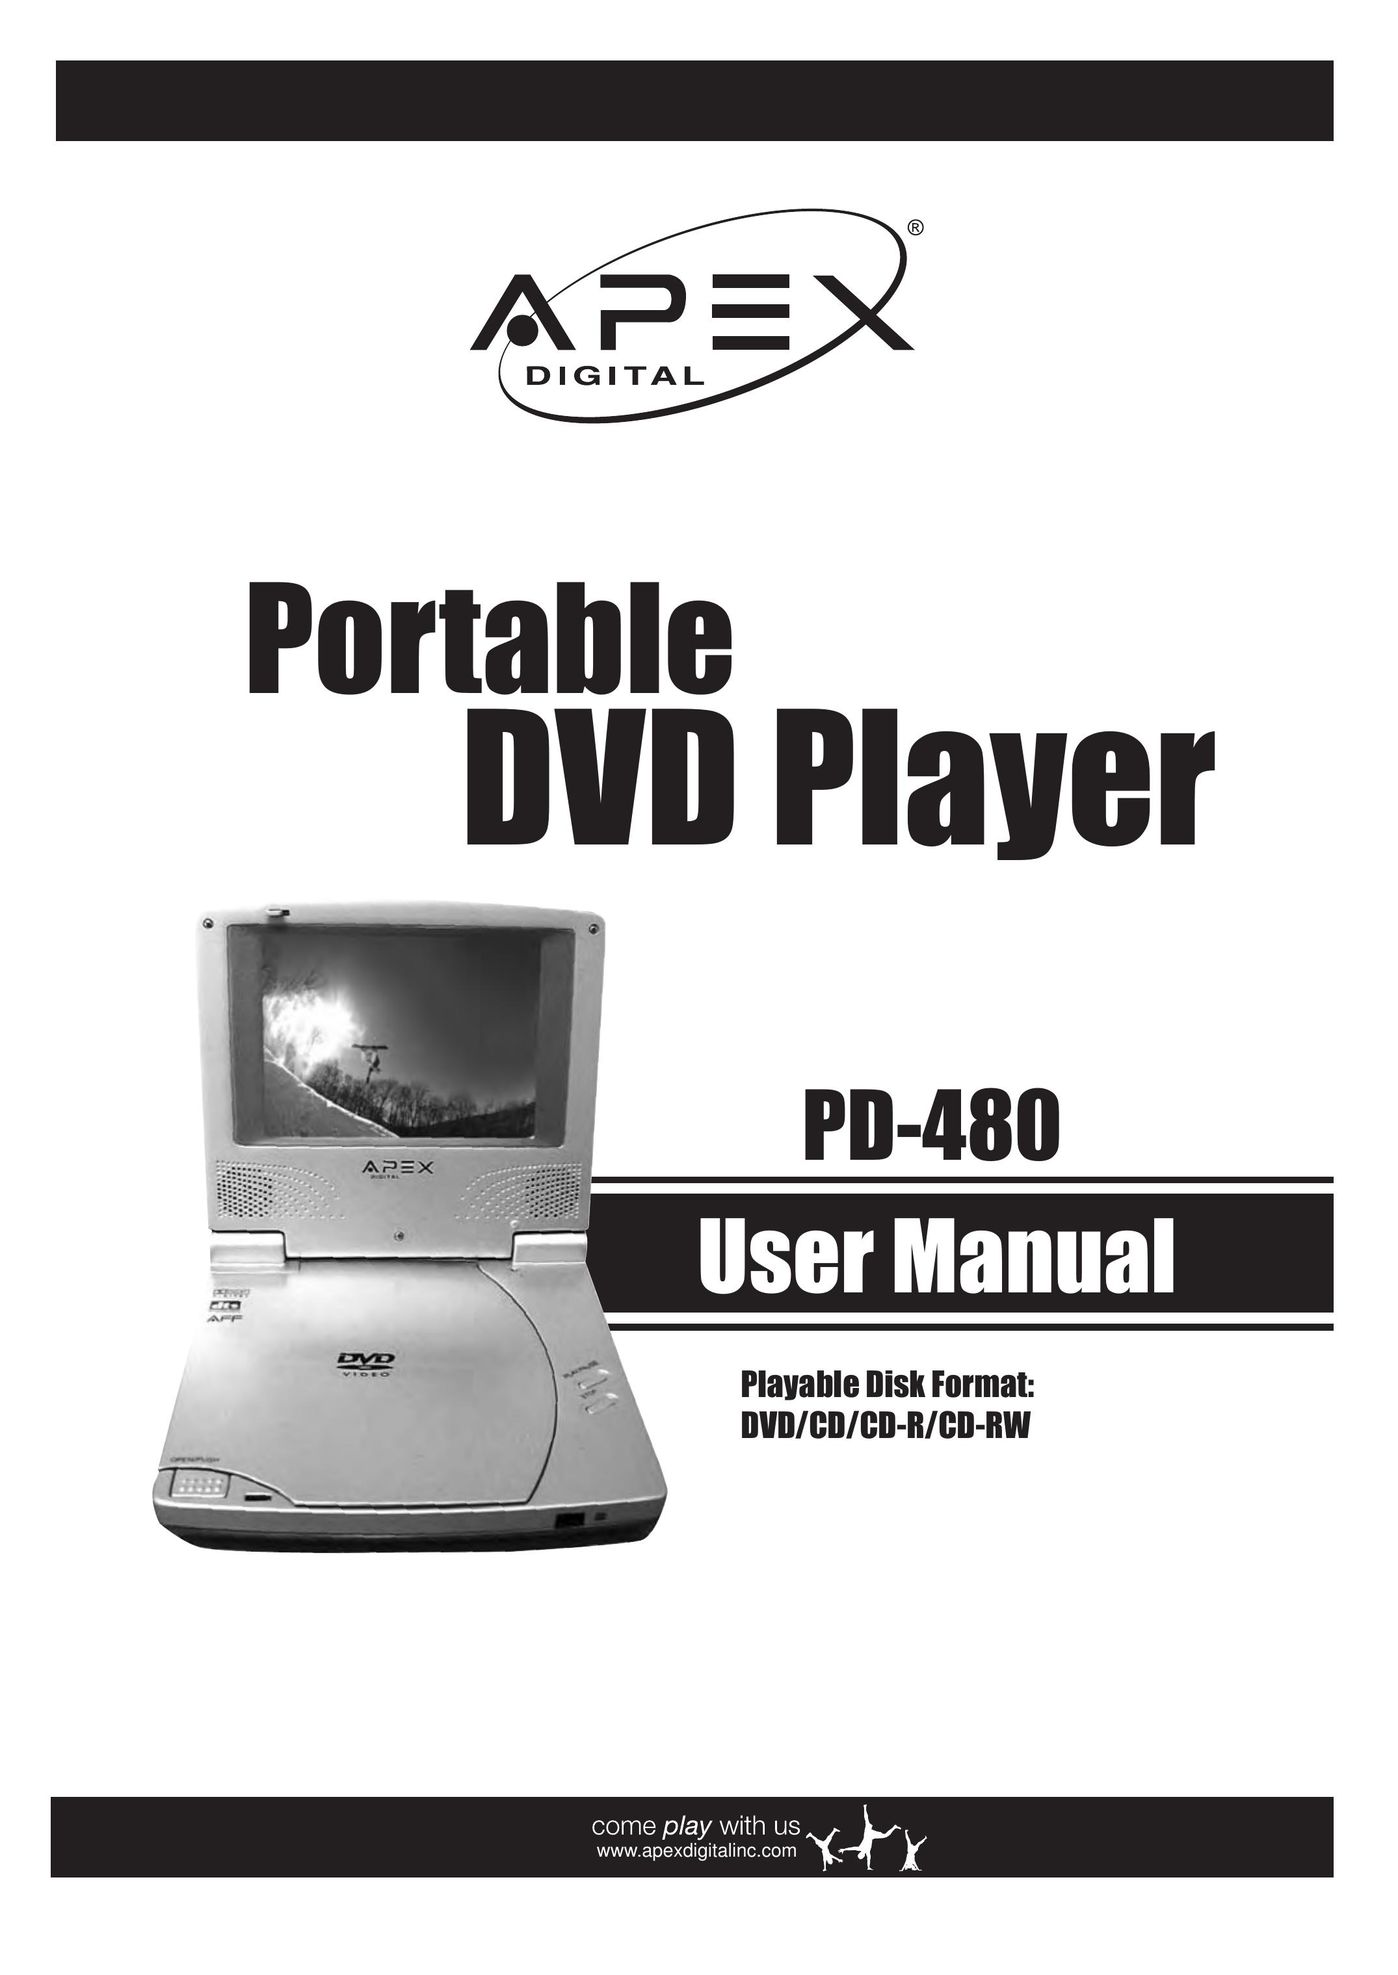 Apex Digital PD-480 Portable DVD Player User Manual (Page 1)